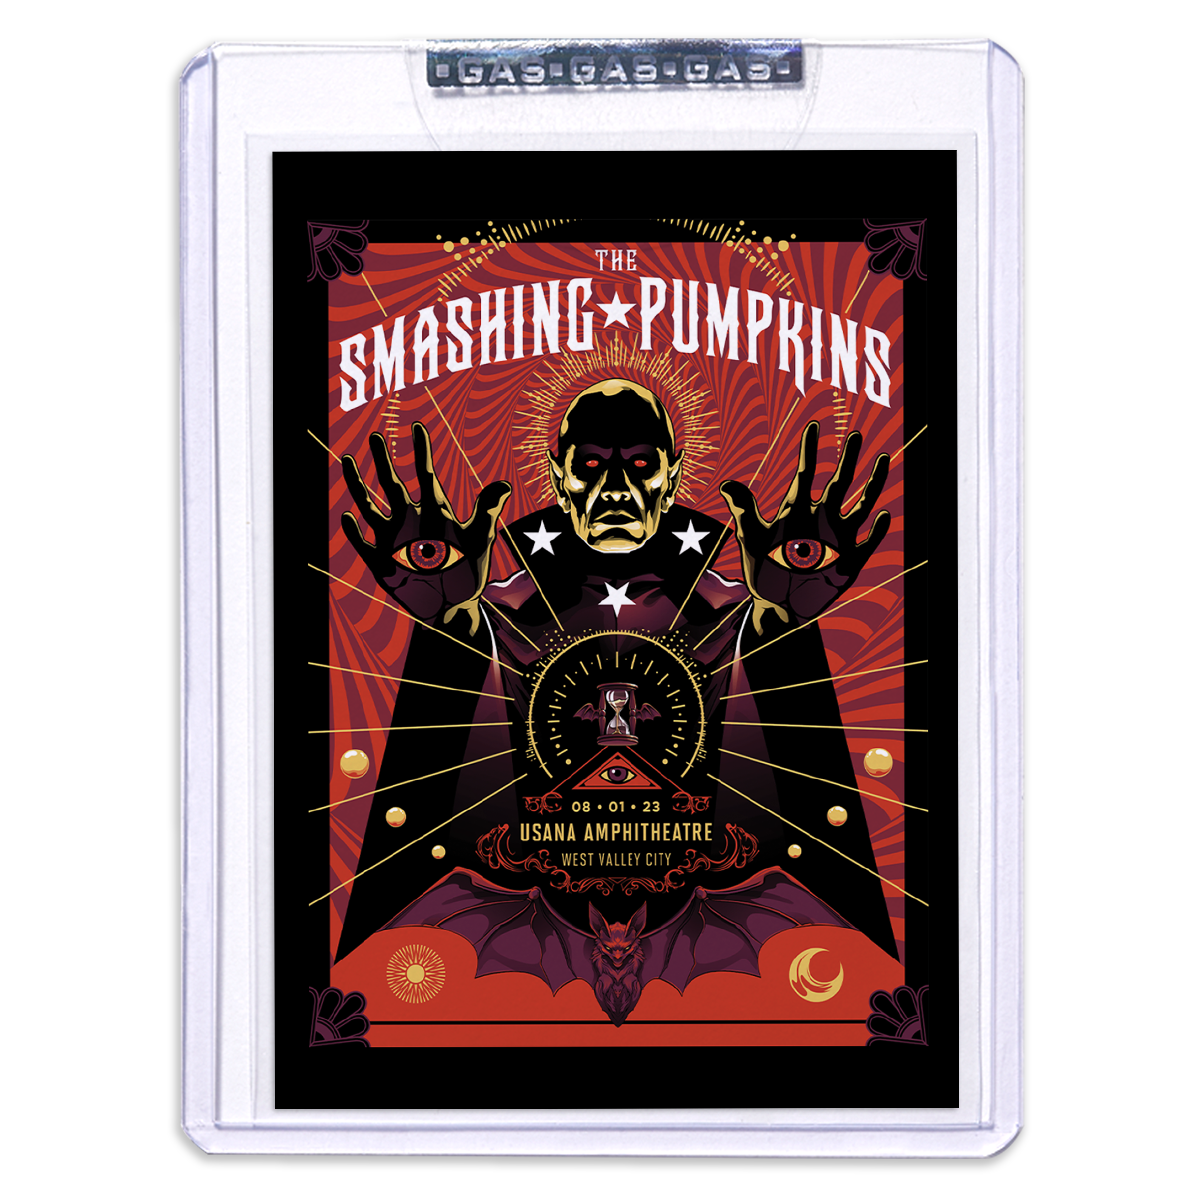 GAS The Smashing Pumpkins August 1, 2023, West Valley City, UT Setlist Trading Card Illustrated by Jack C. Gregory